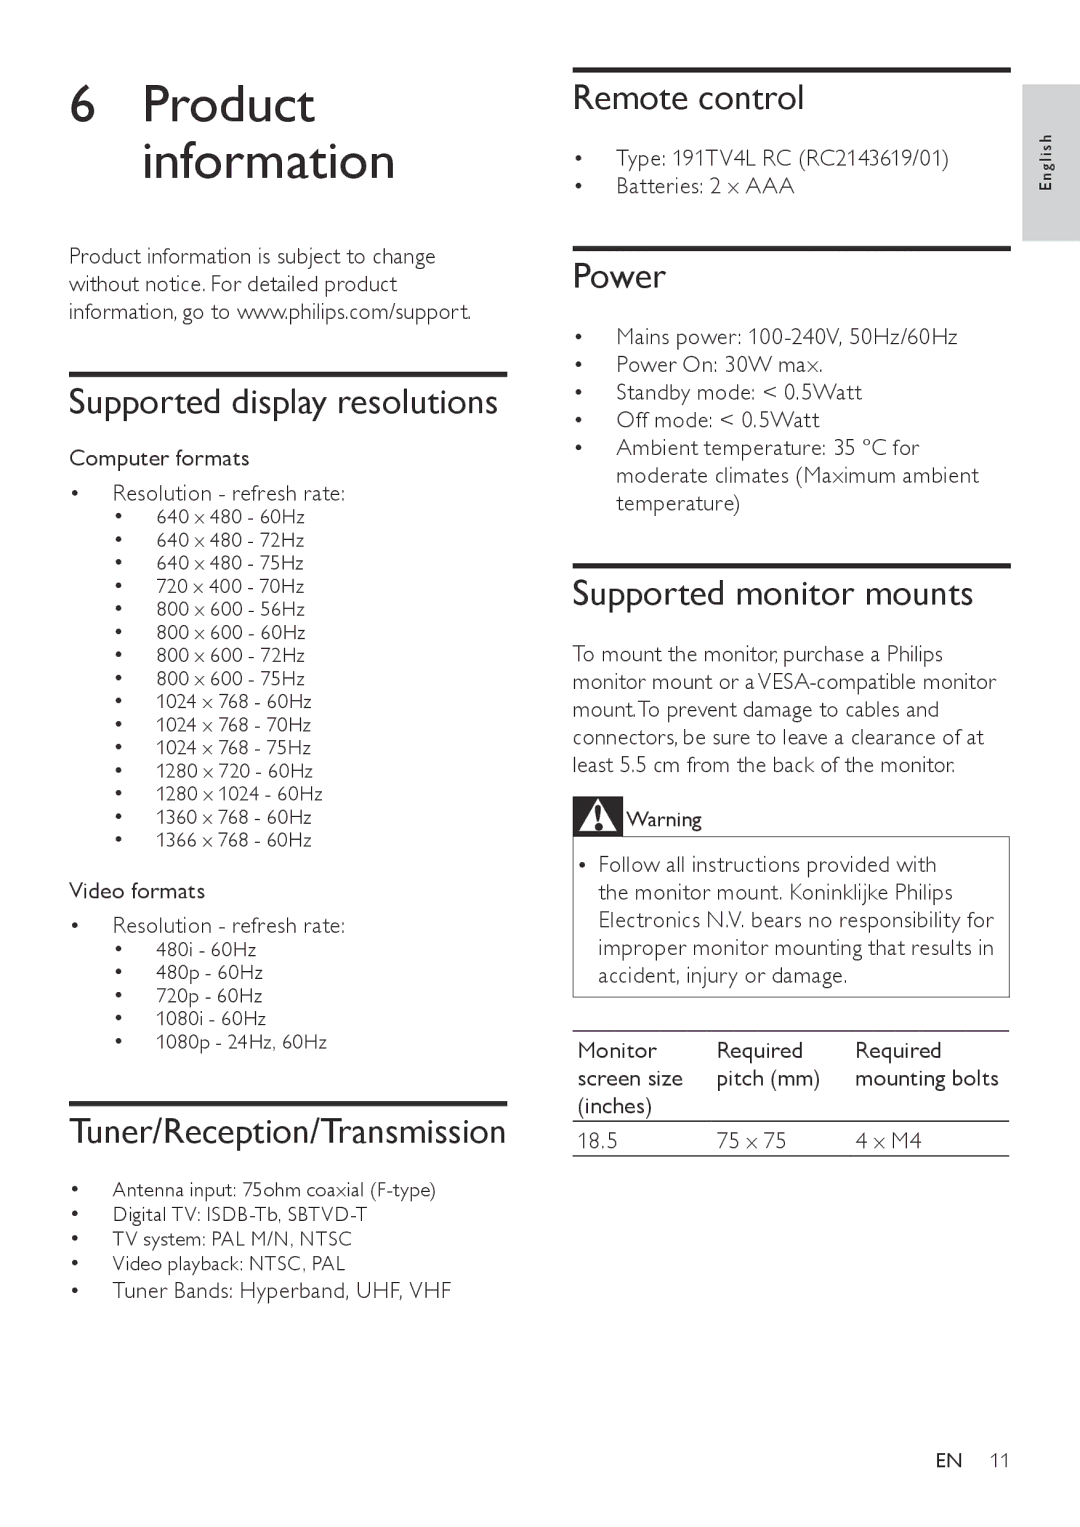 Philips 191TV4L user manual Product information, Supported display resolutions, Tuner/Reception/Transmission, Power 